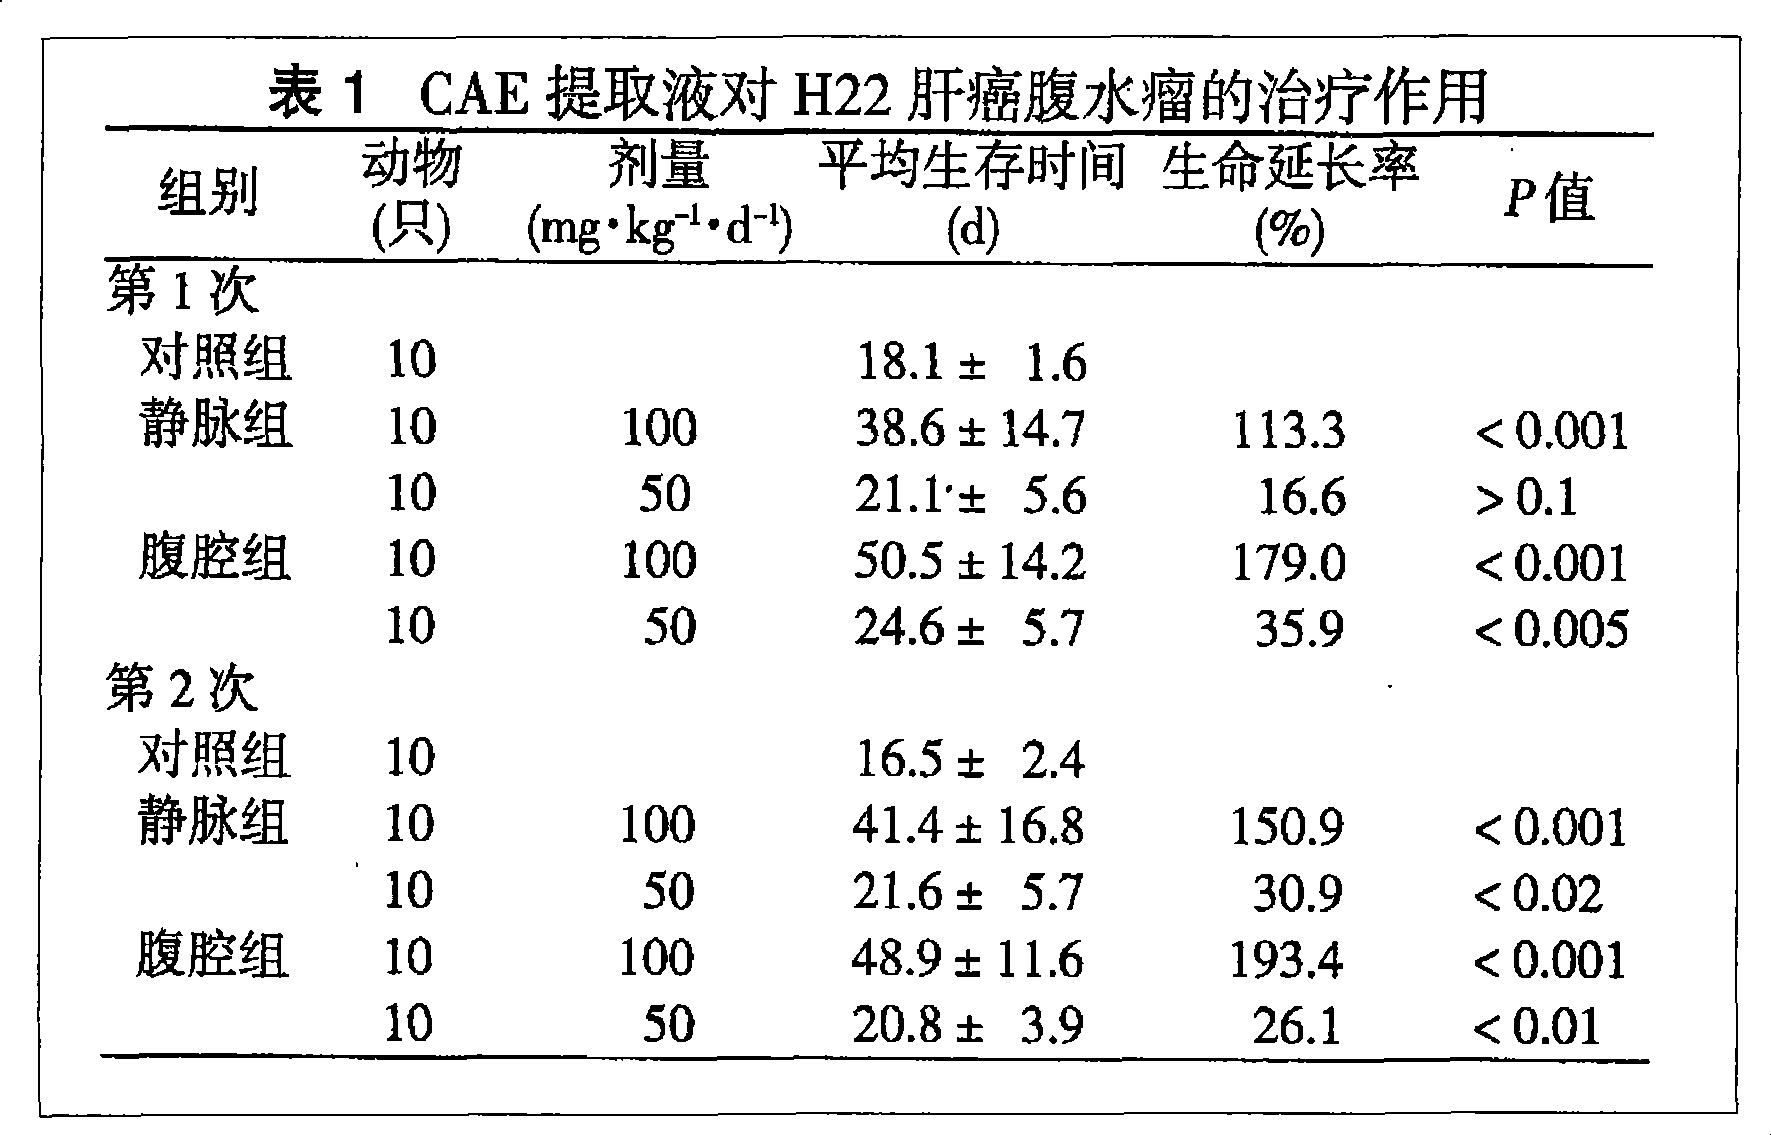 Method for preparing Caesalpinia sappan water extract and uses thereof